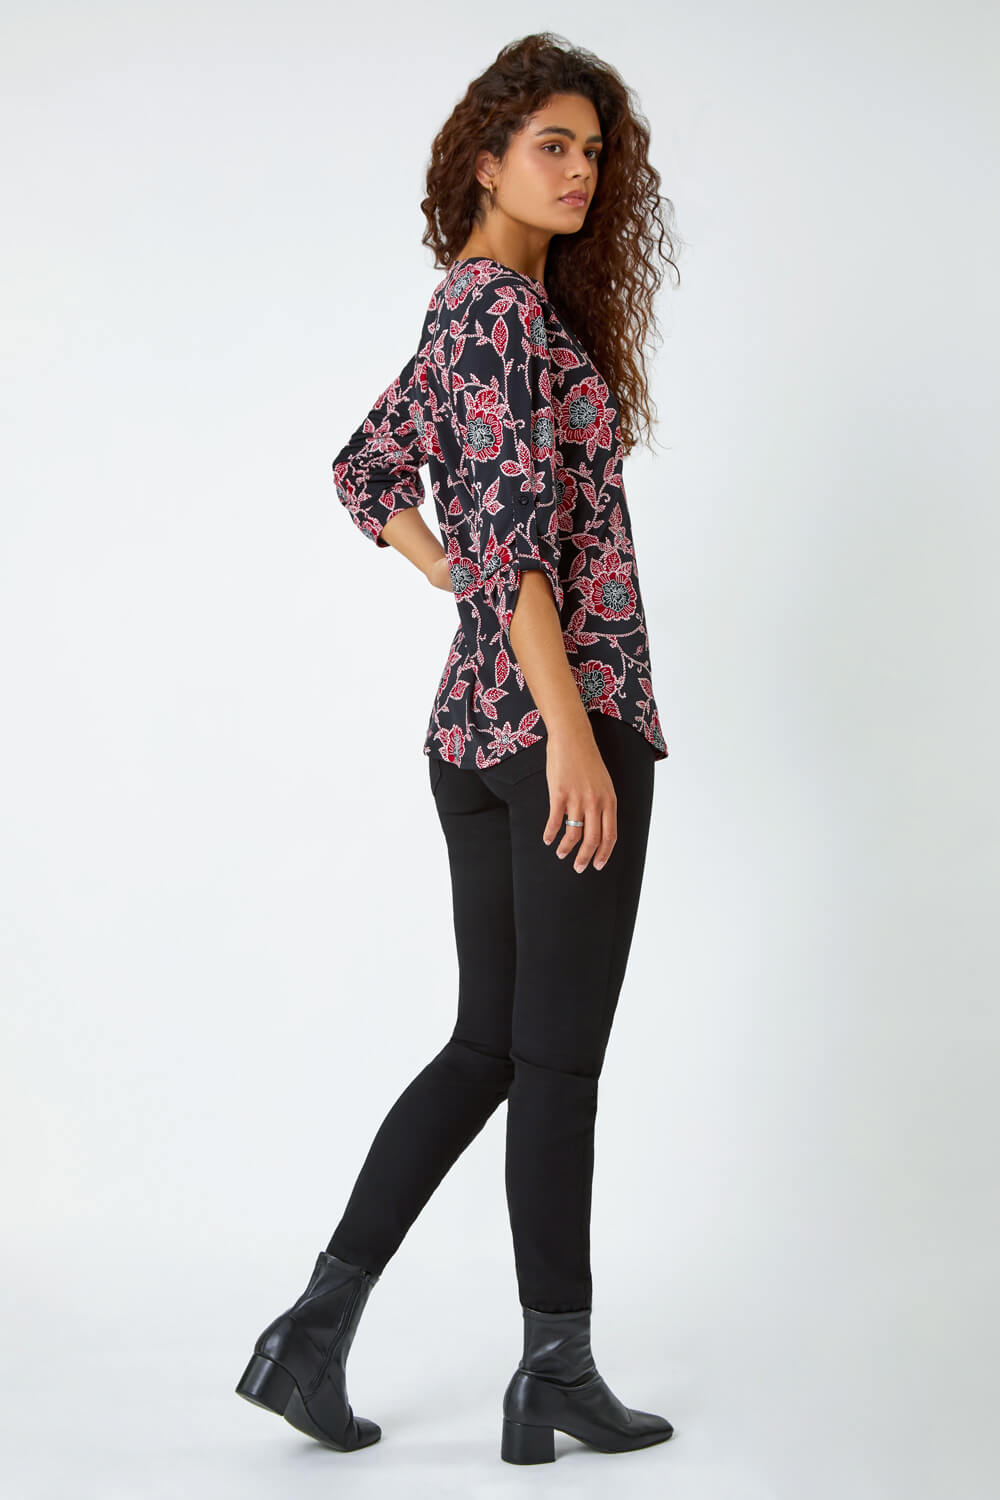 Red Textured Floral Print Stretch Shirt, Image 3 of 5